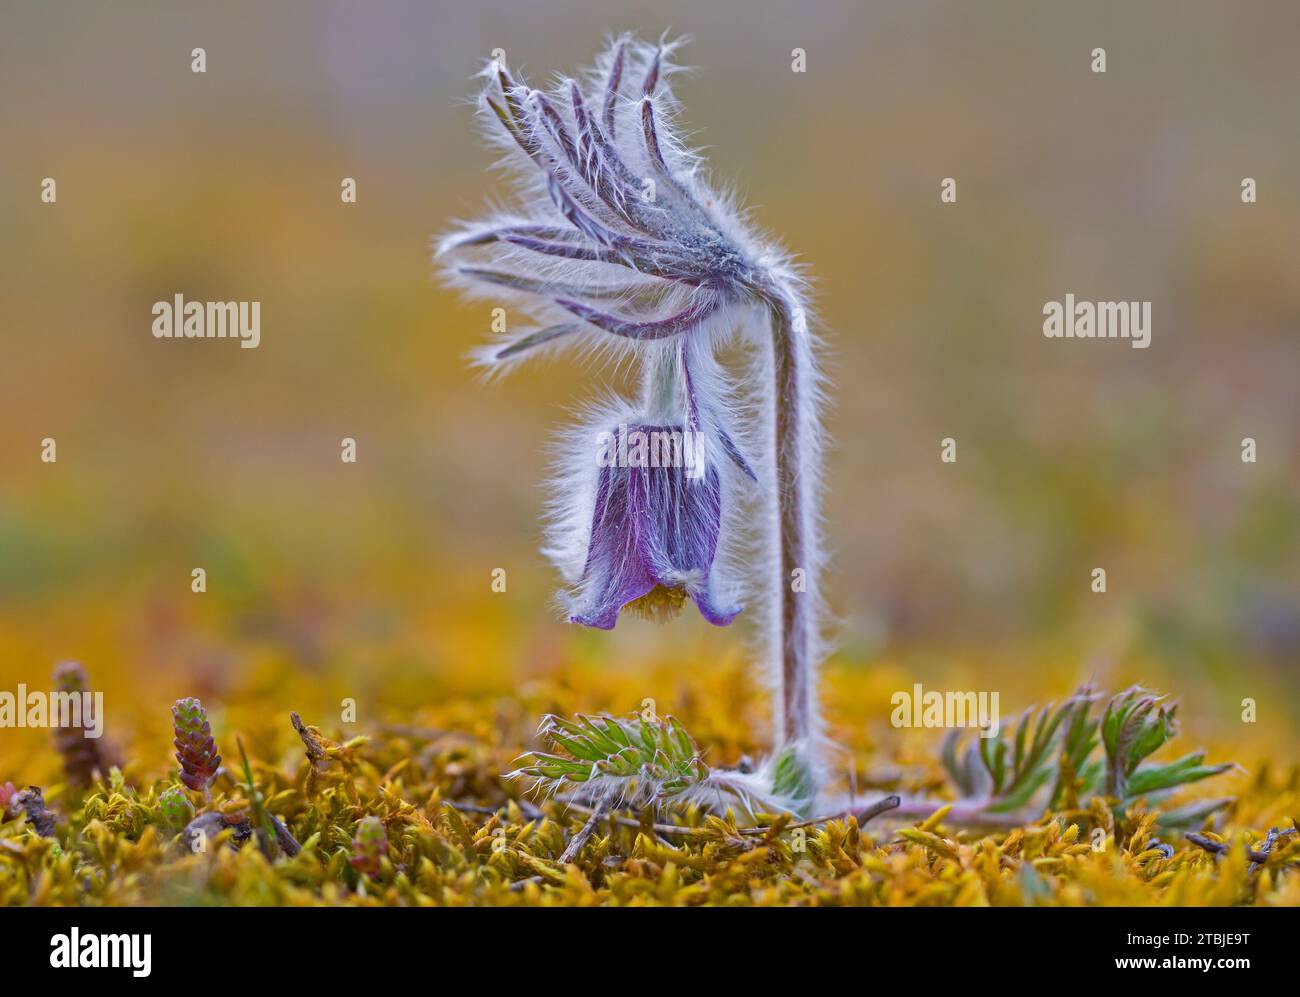 Small pasque flower (Pulsatilla pratensis / Anemone pratensis) flowering in spring, native to central and eastern Europe Stock Photo